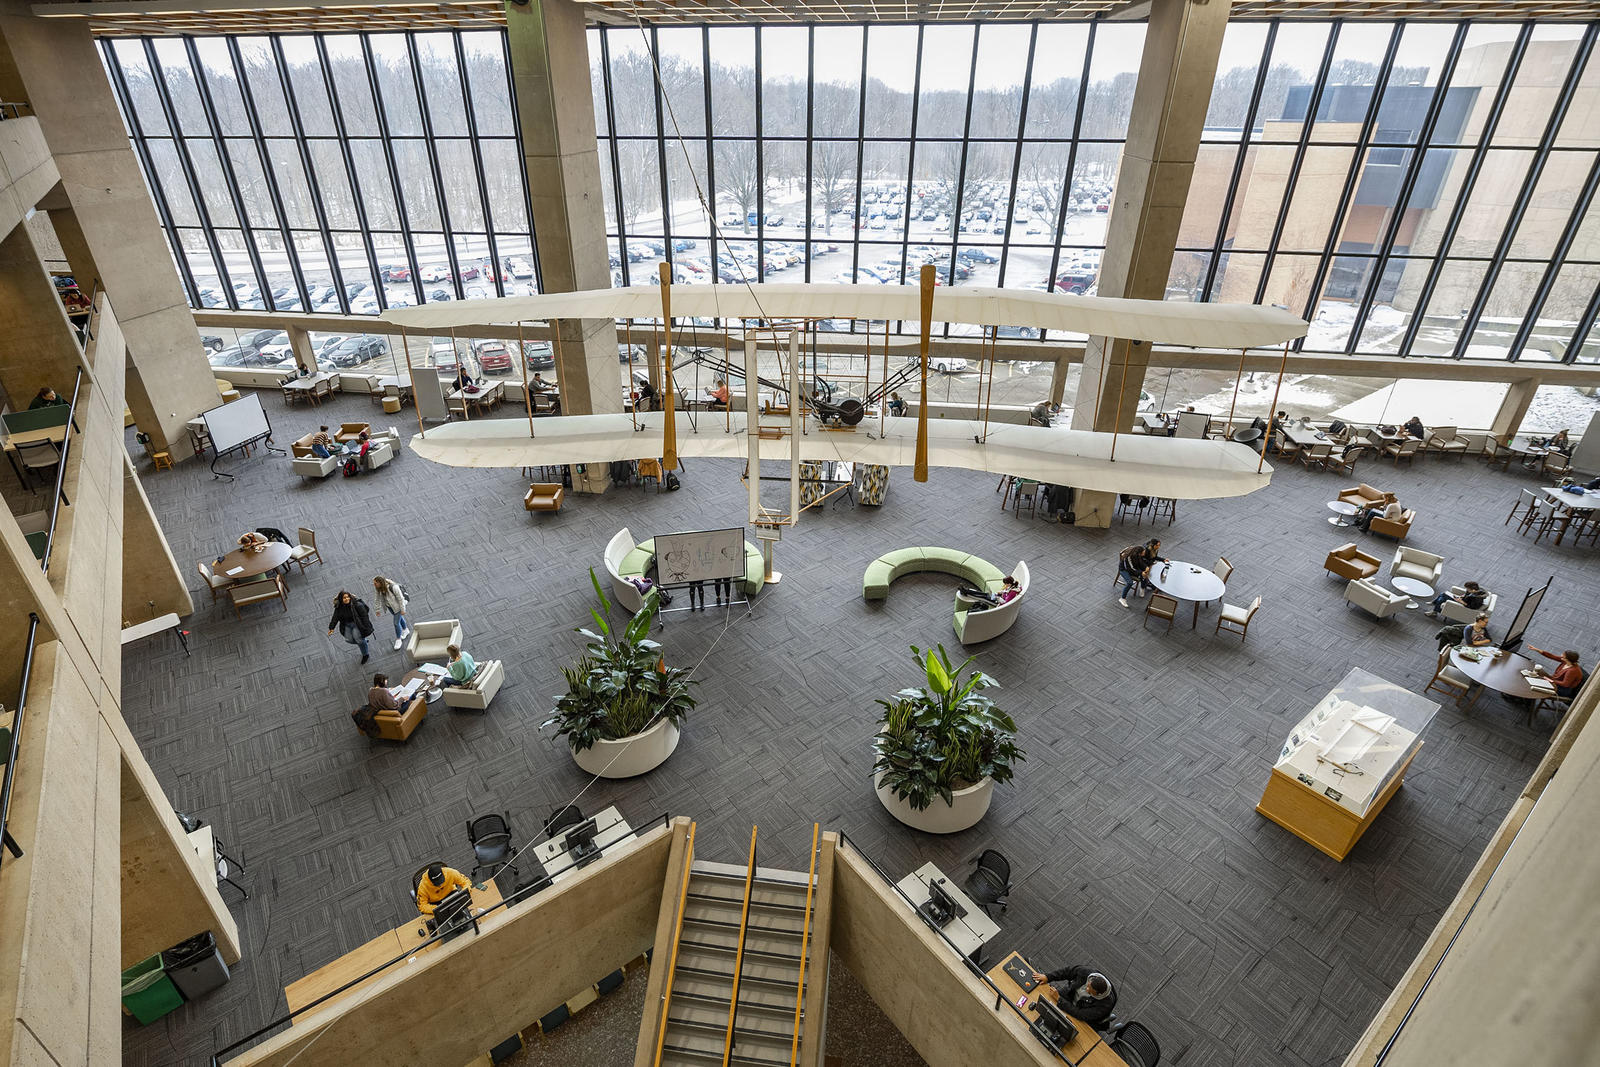 photo of the biplane, steps, tables, chairs, and windows on the second floor of the dunbar library